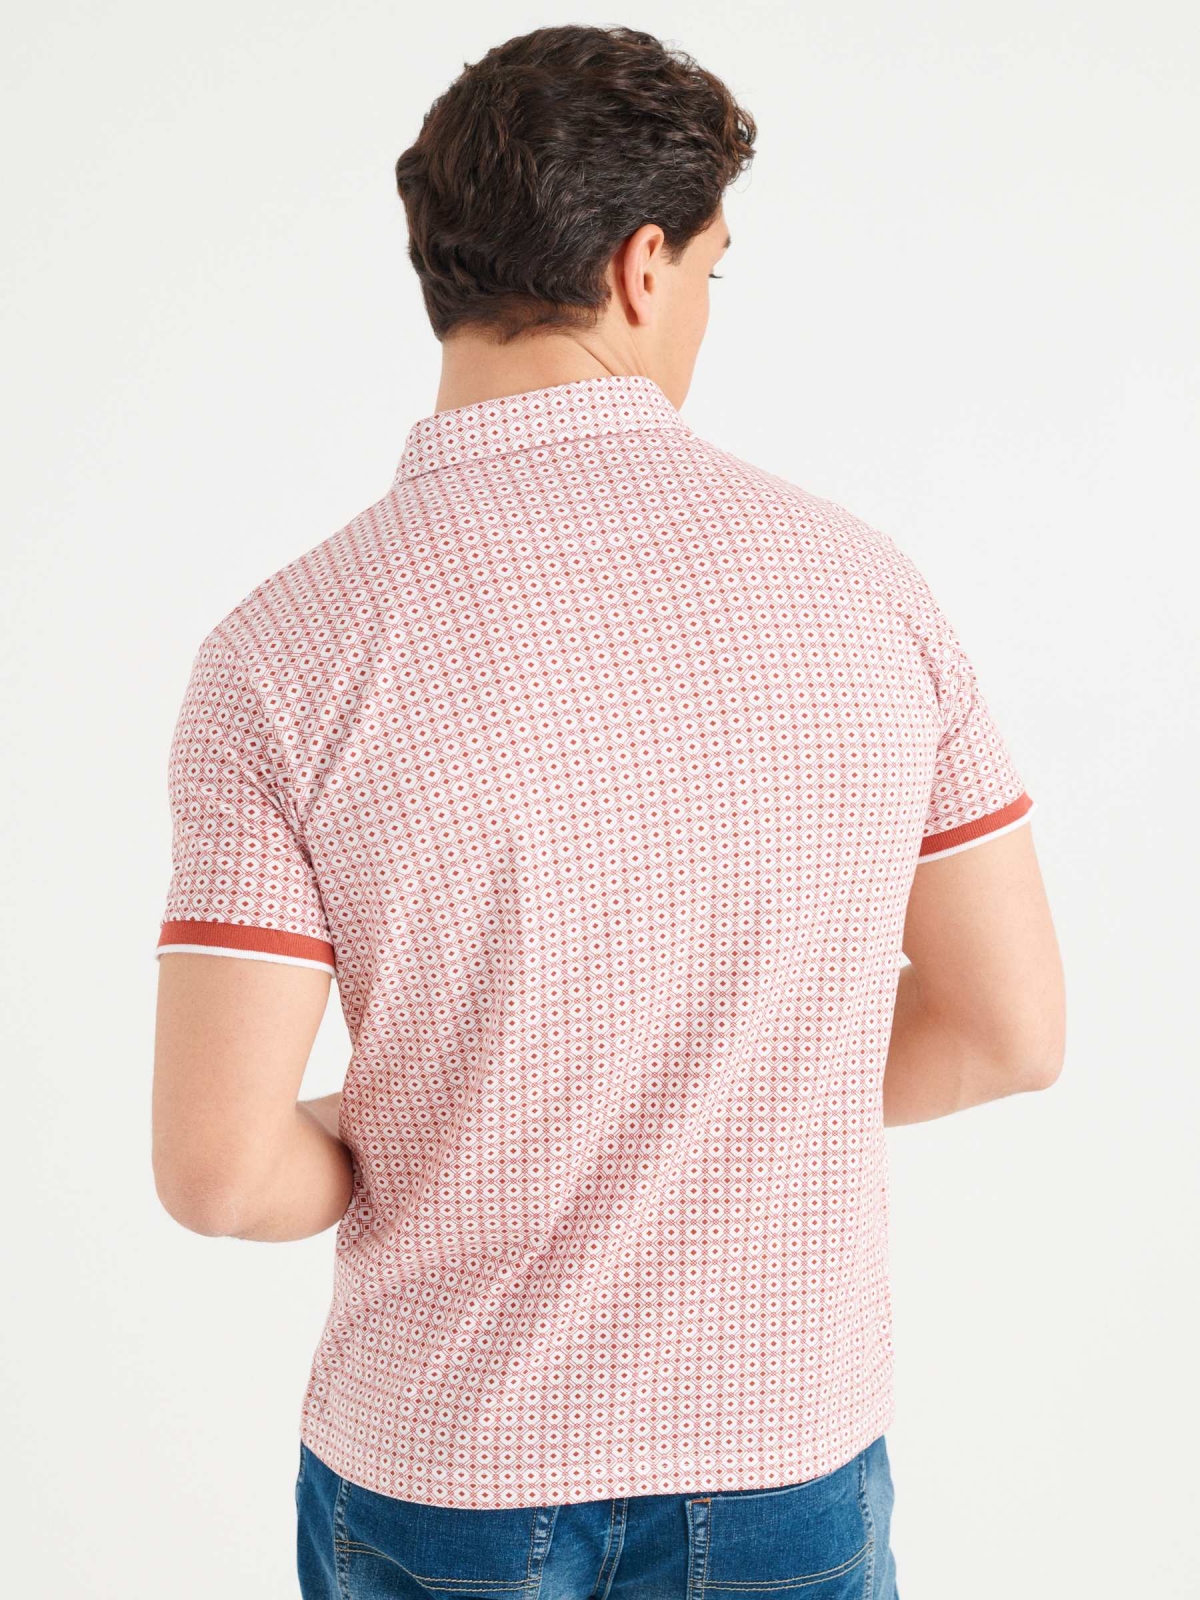 Jacquard polo shirt with pocket orangish red middle back view